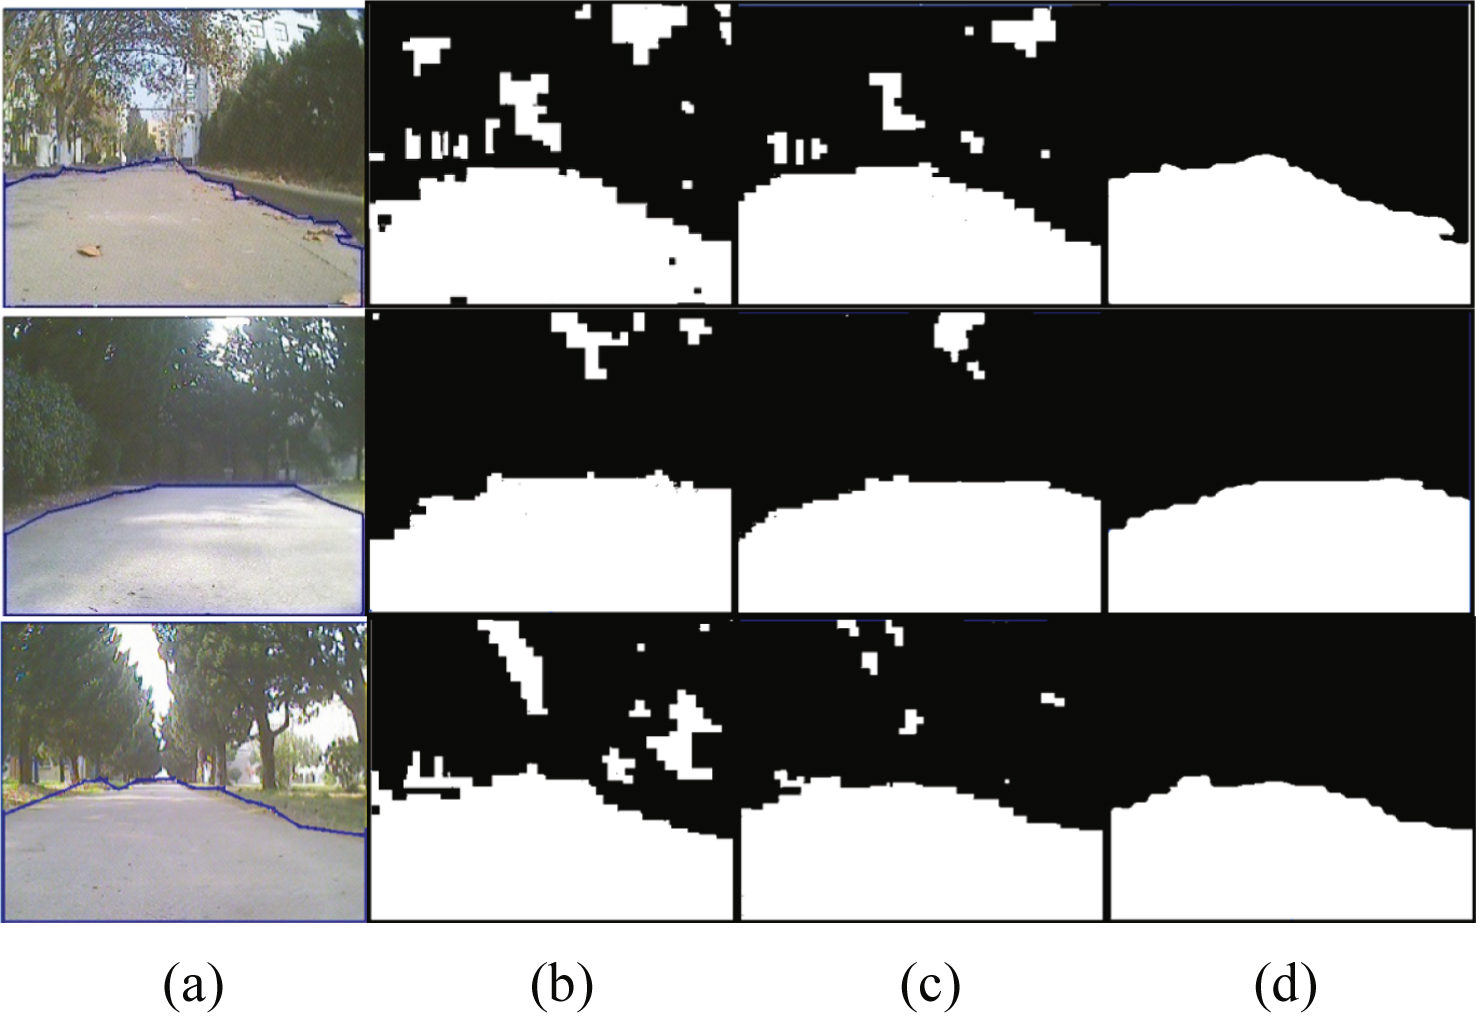 Results of road detection, (a) original scenes and road boundary, (b) results of SVM, (c) results of FSVM, (d) results after refinement based on (c), i.e. result of the proposed algorithm.